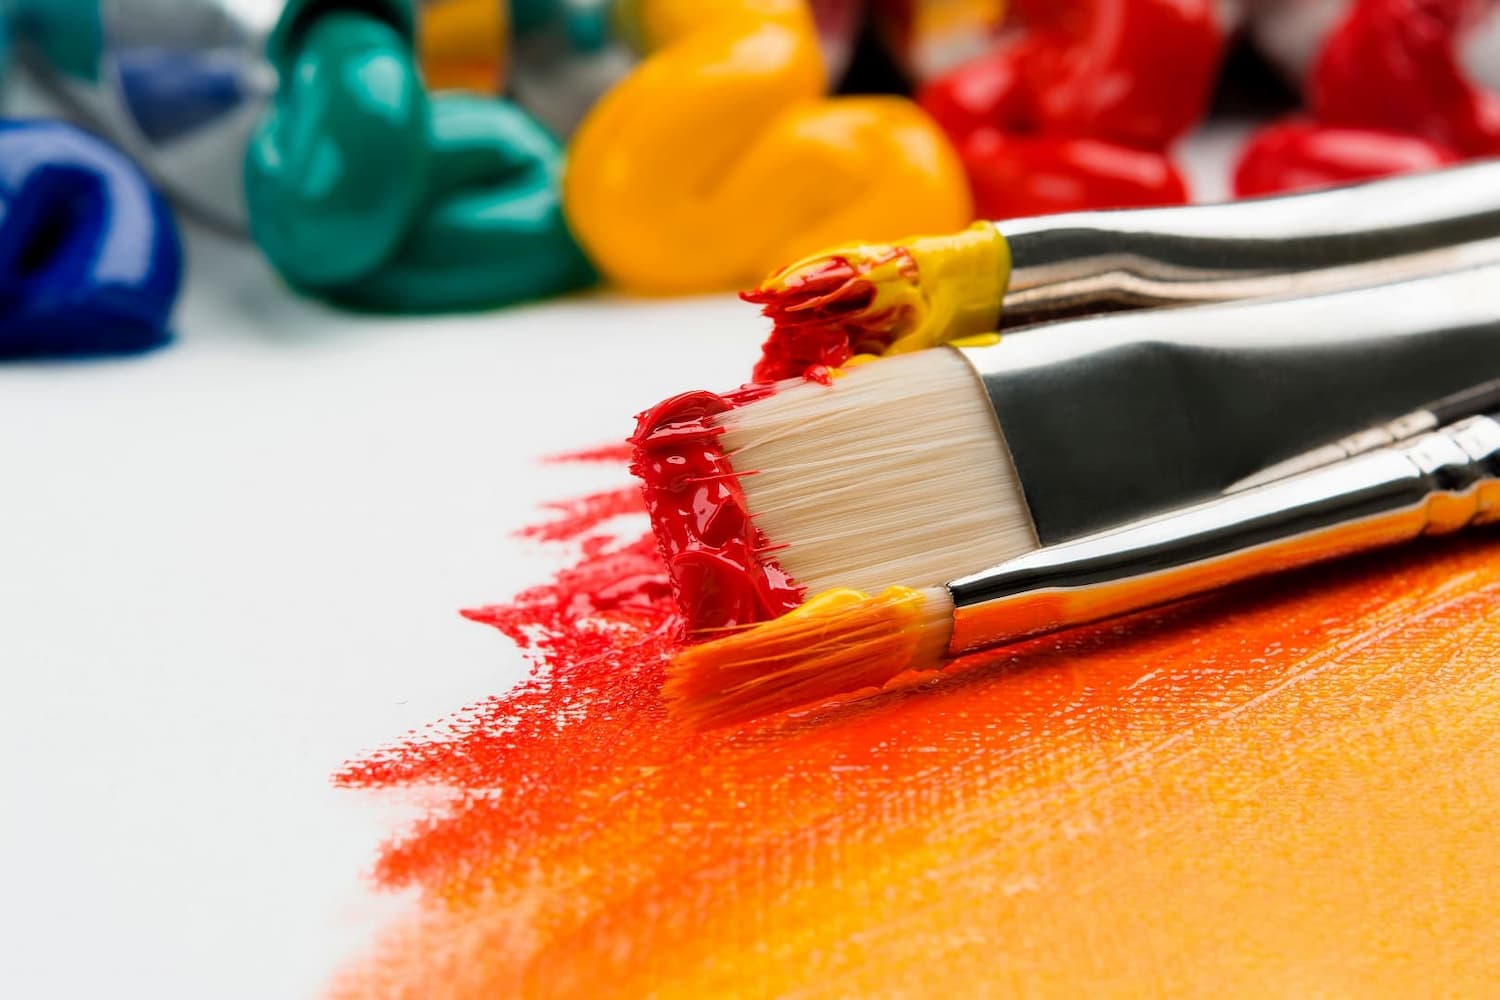 About Art Therapy Courses